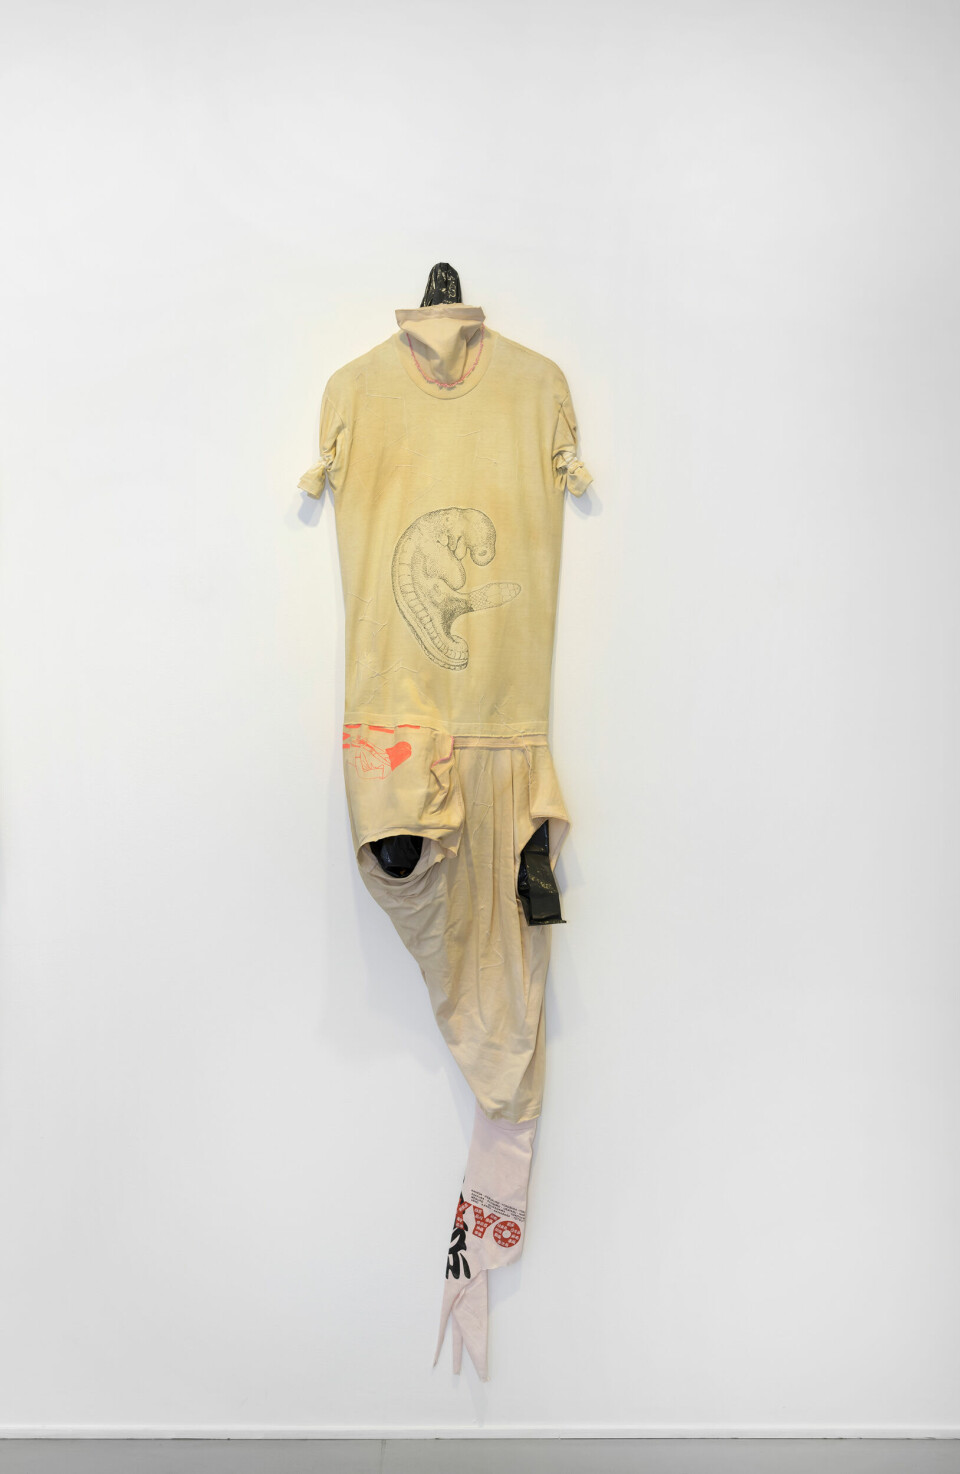 Leif Holmstrand, Costume for a New Tail (It’s a Girl) (2015), textile wall sculpture: T-shirt fabric, print depicting human fetus plus snake head, garbage bag plastic, pearls et cetera. Foto: Øystein Thorvaldsen